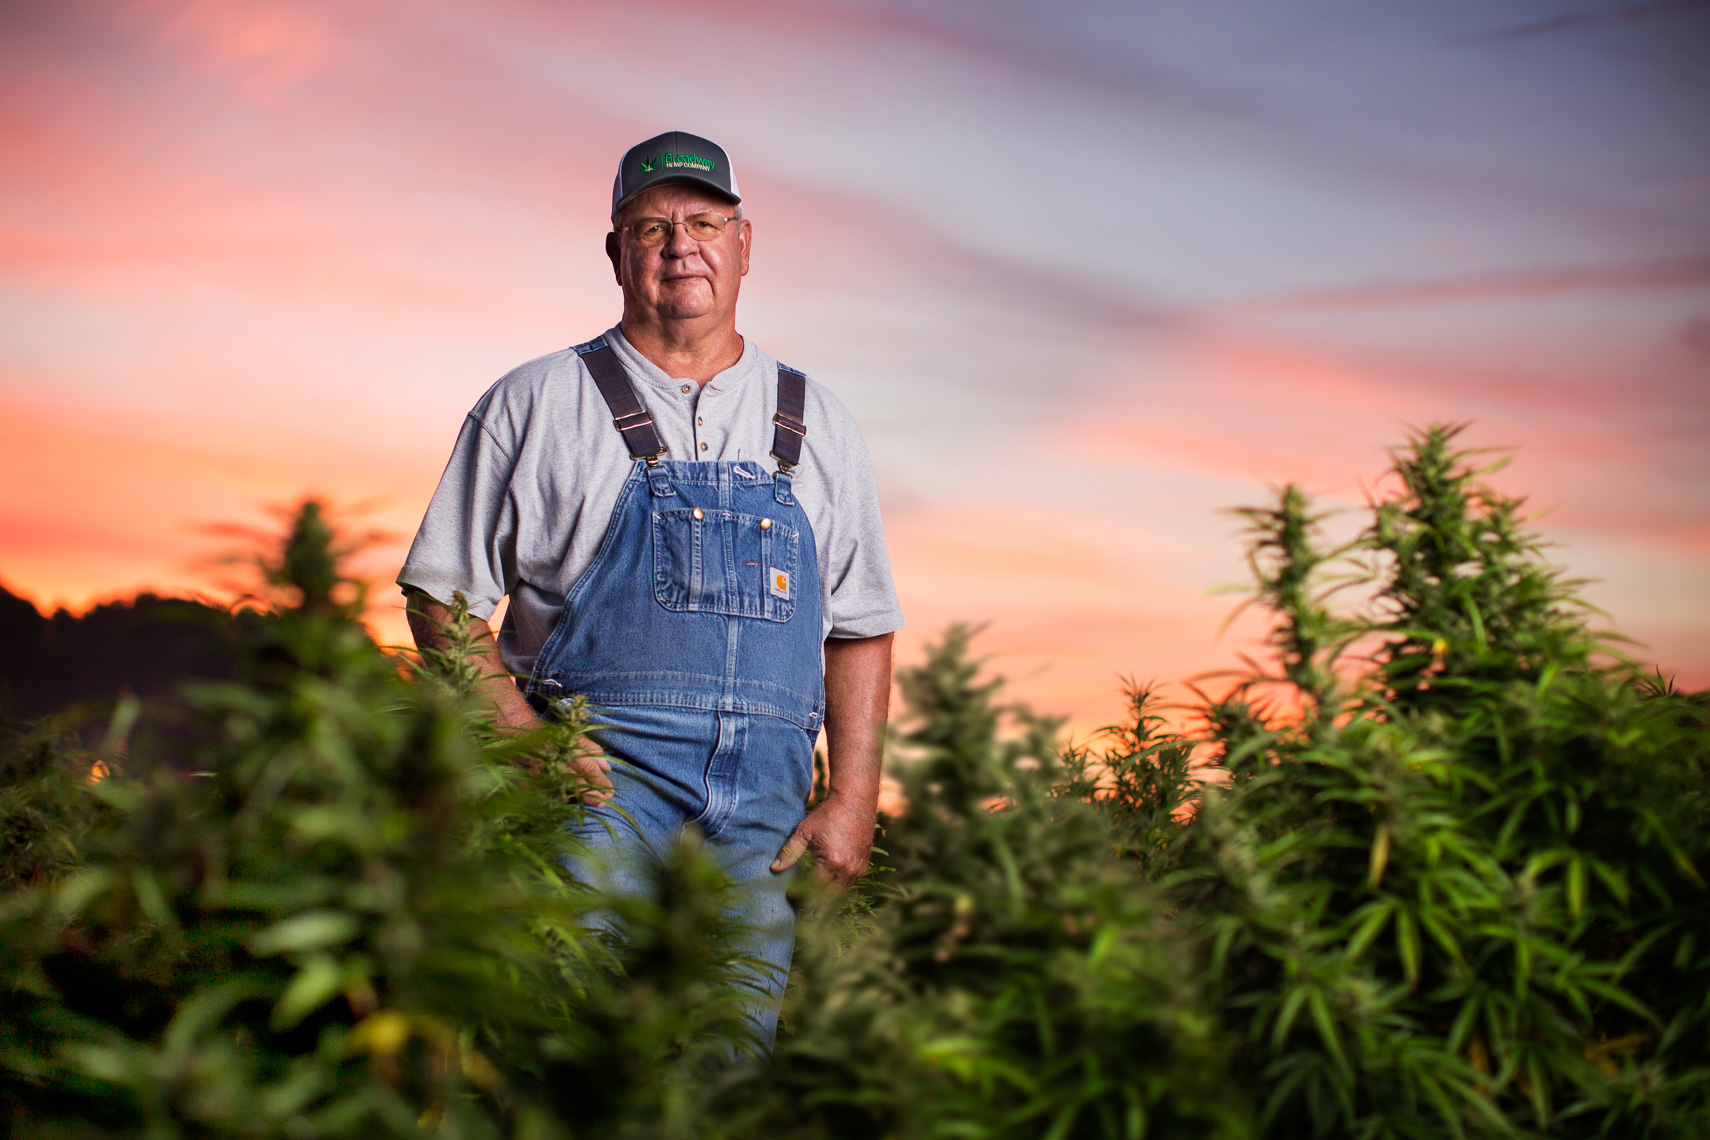 North_Carolina_Hemp_Farm_and_Farmers_for_Criticality_and_Aliance_One_20180904_photo_by_Justin_Kase_Conder_0083_Retouched_V02